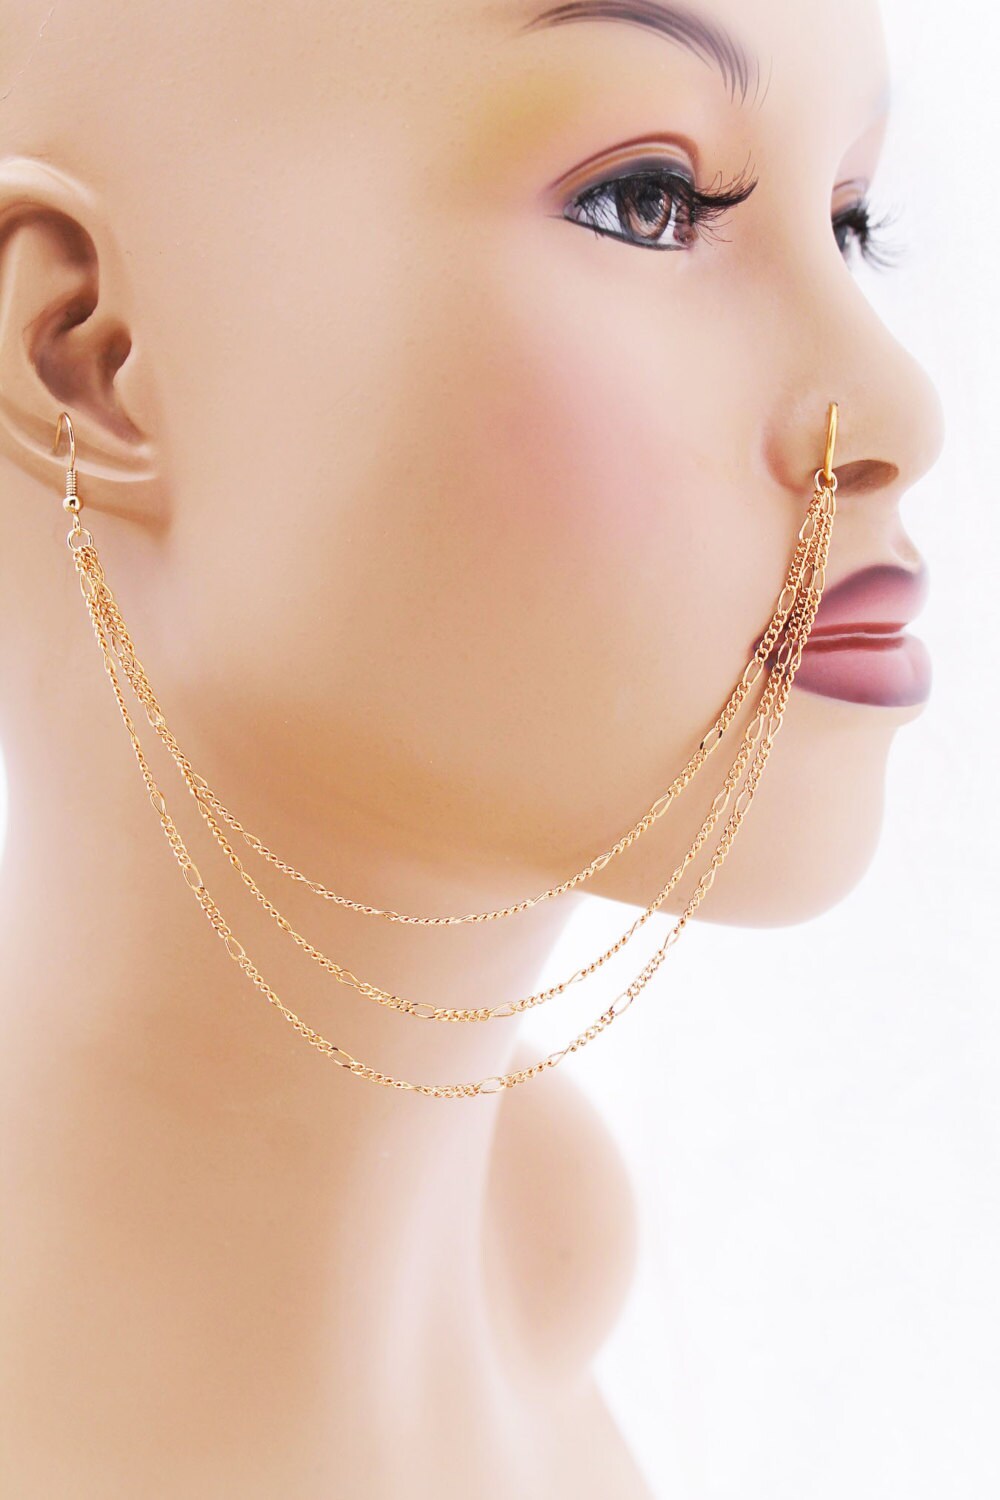 Nose Chain Nose Jewelry Gold Filled Nose Chain Nose Ring